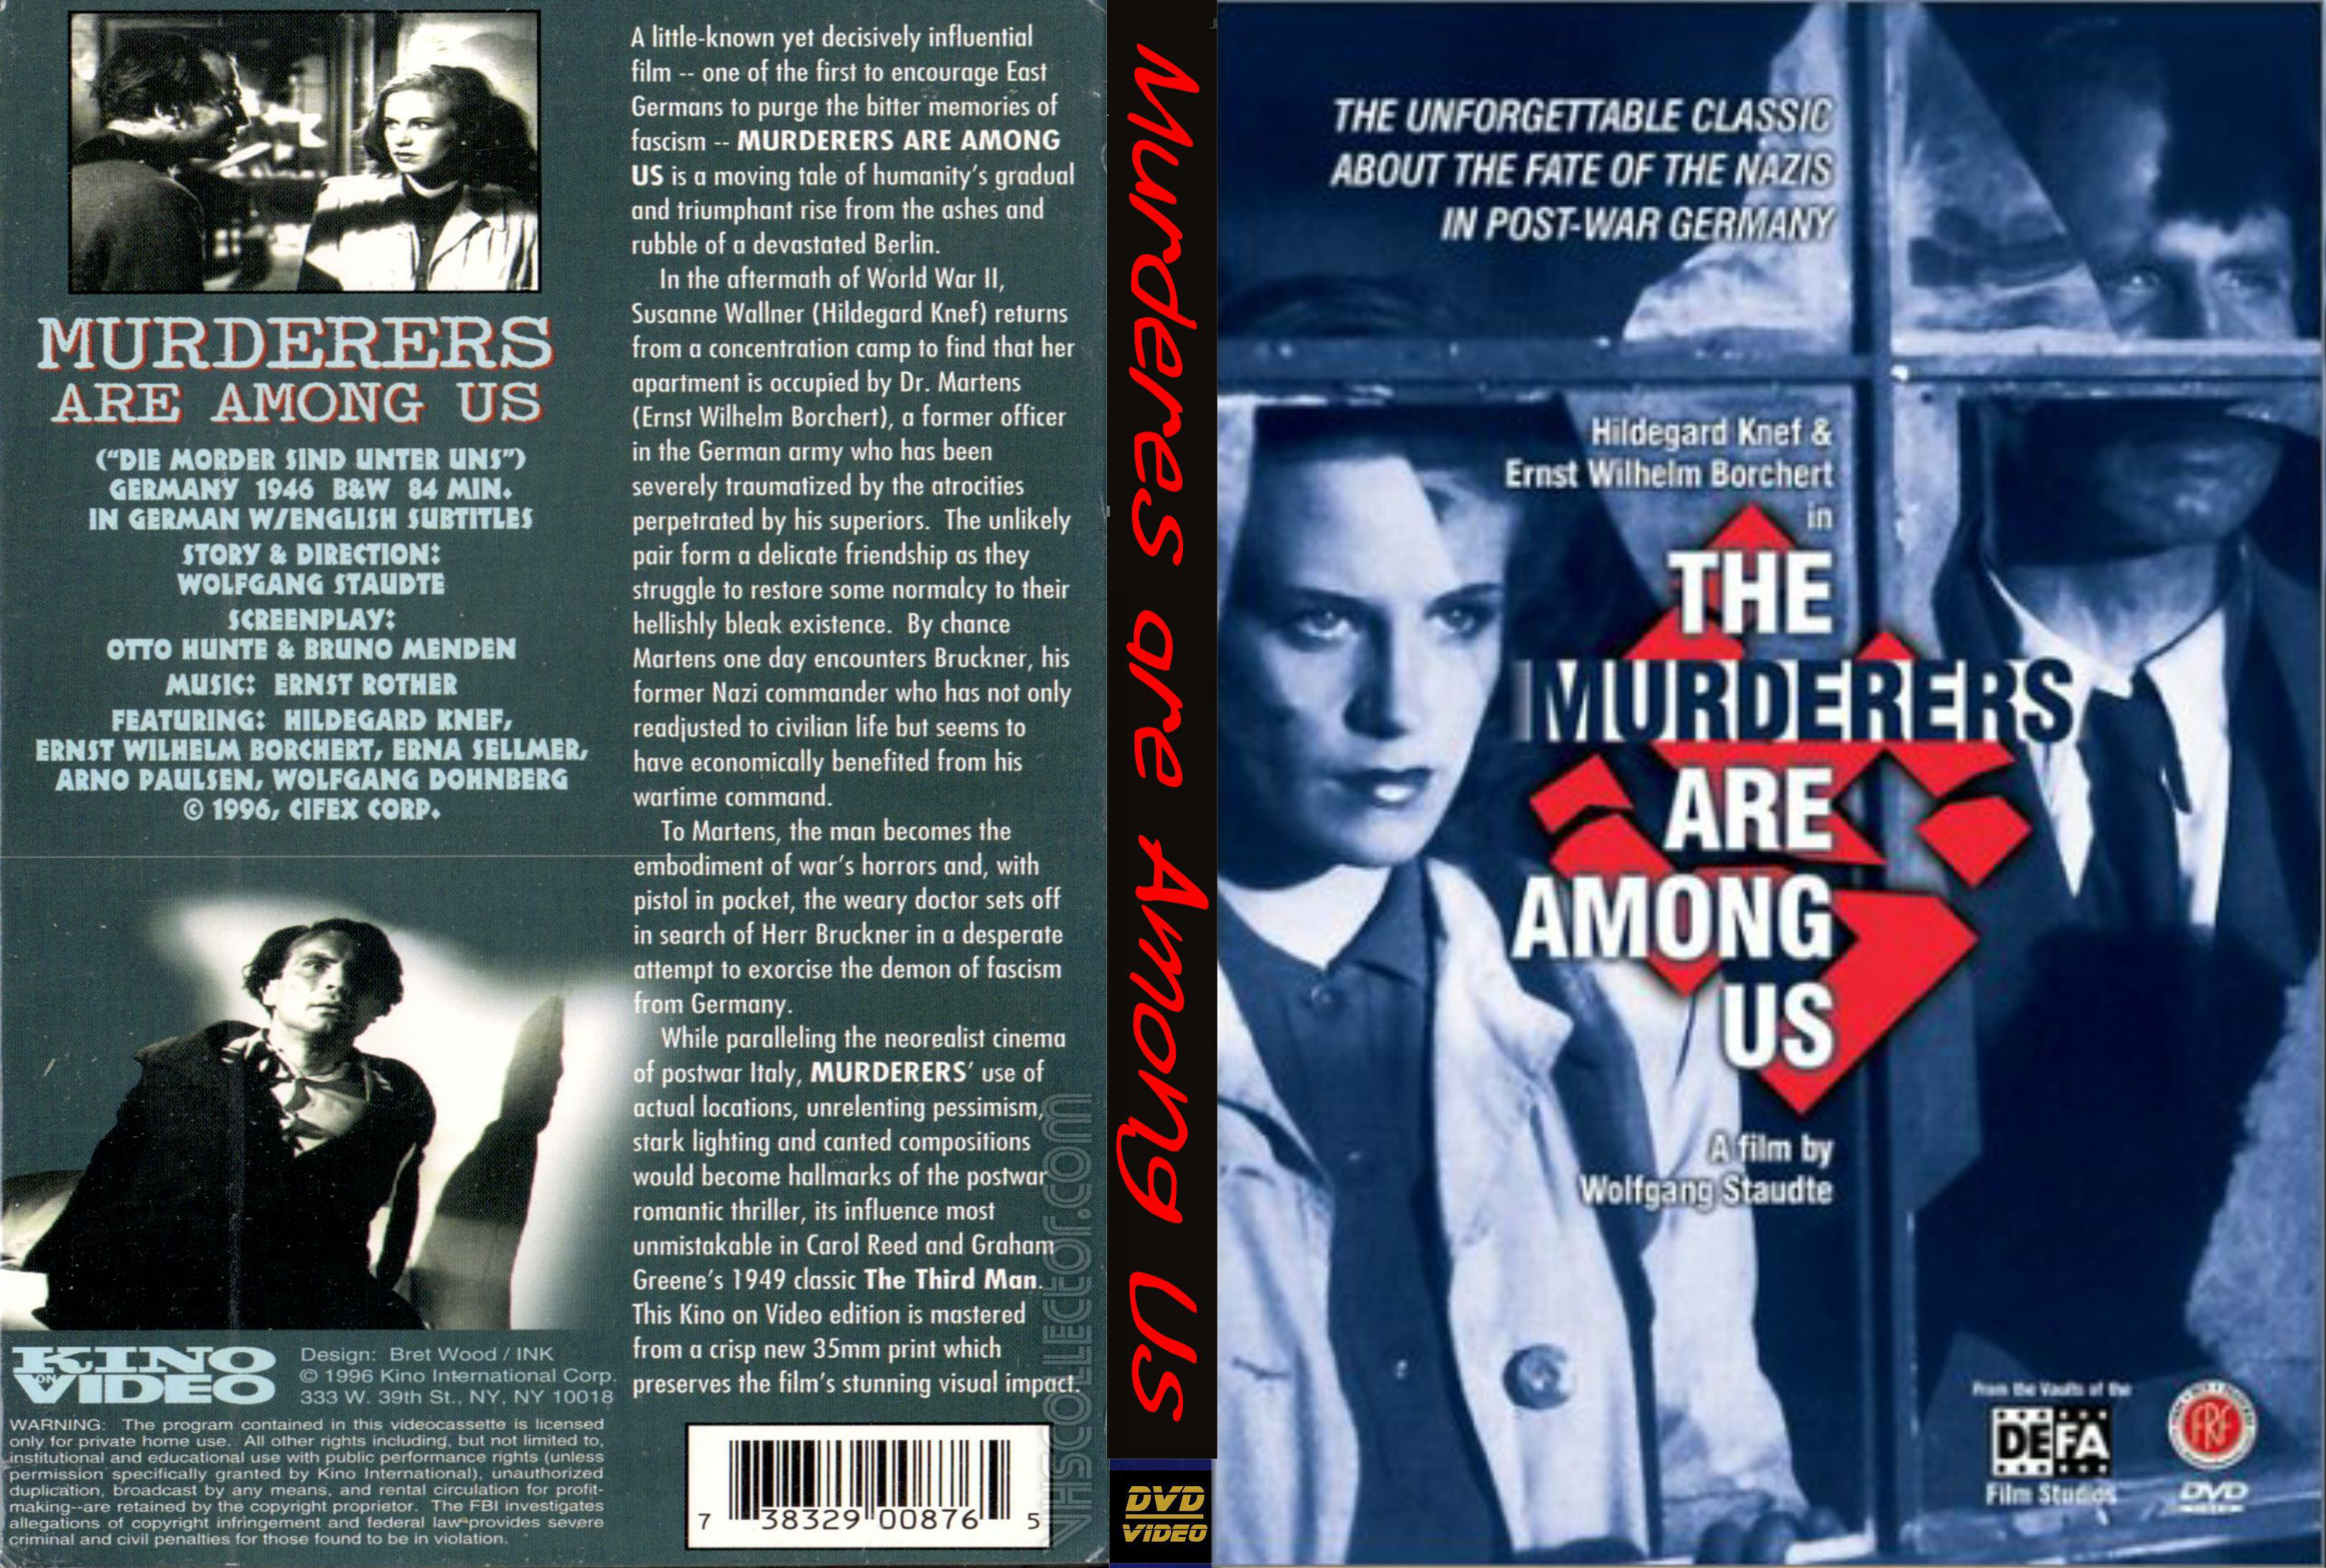 The murderers are among us dvd 2